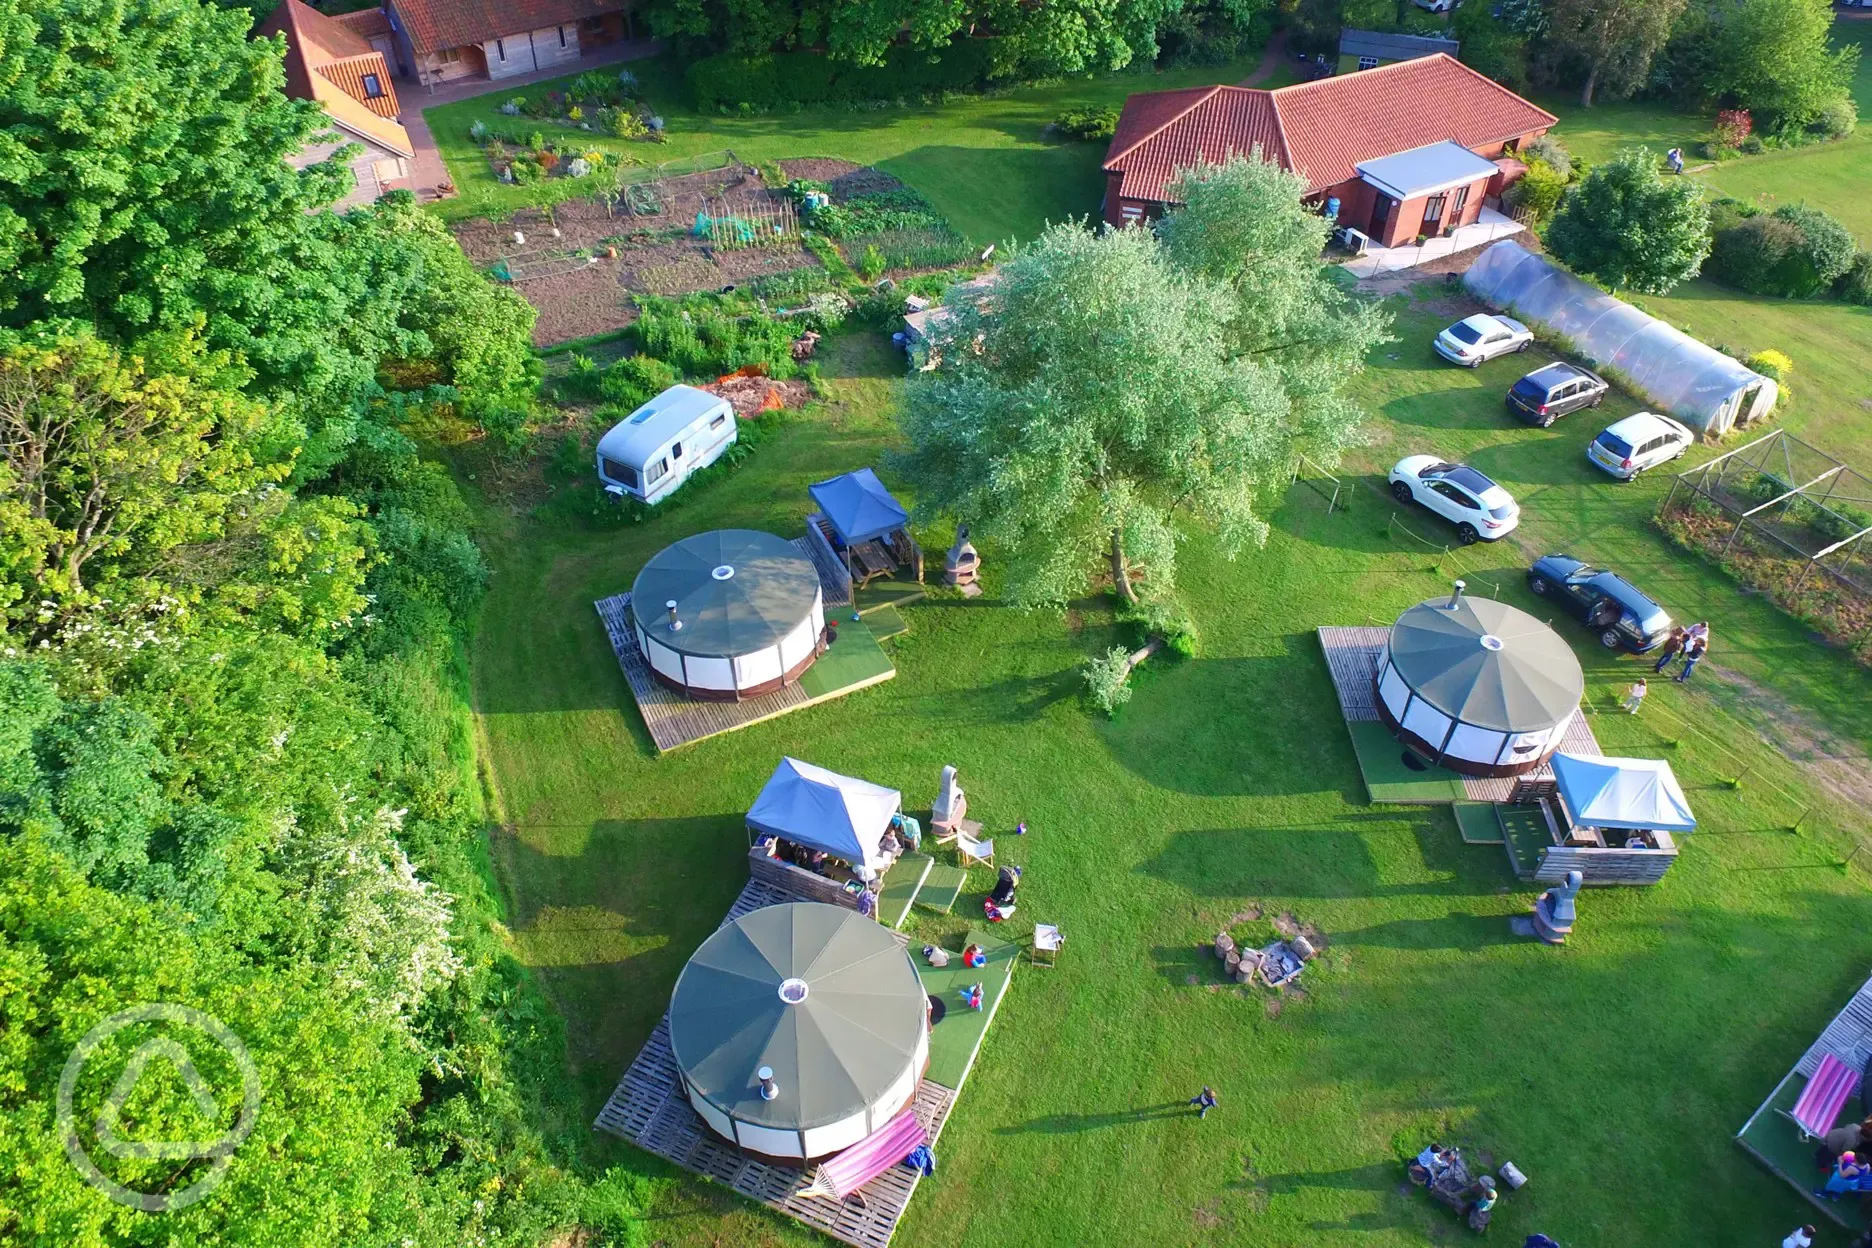 The glamping site and indoor swimming pool